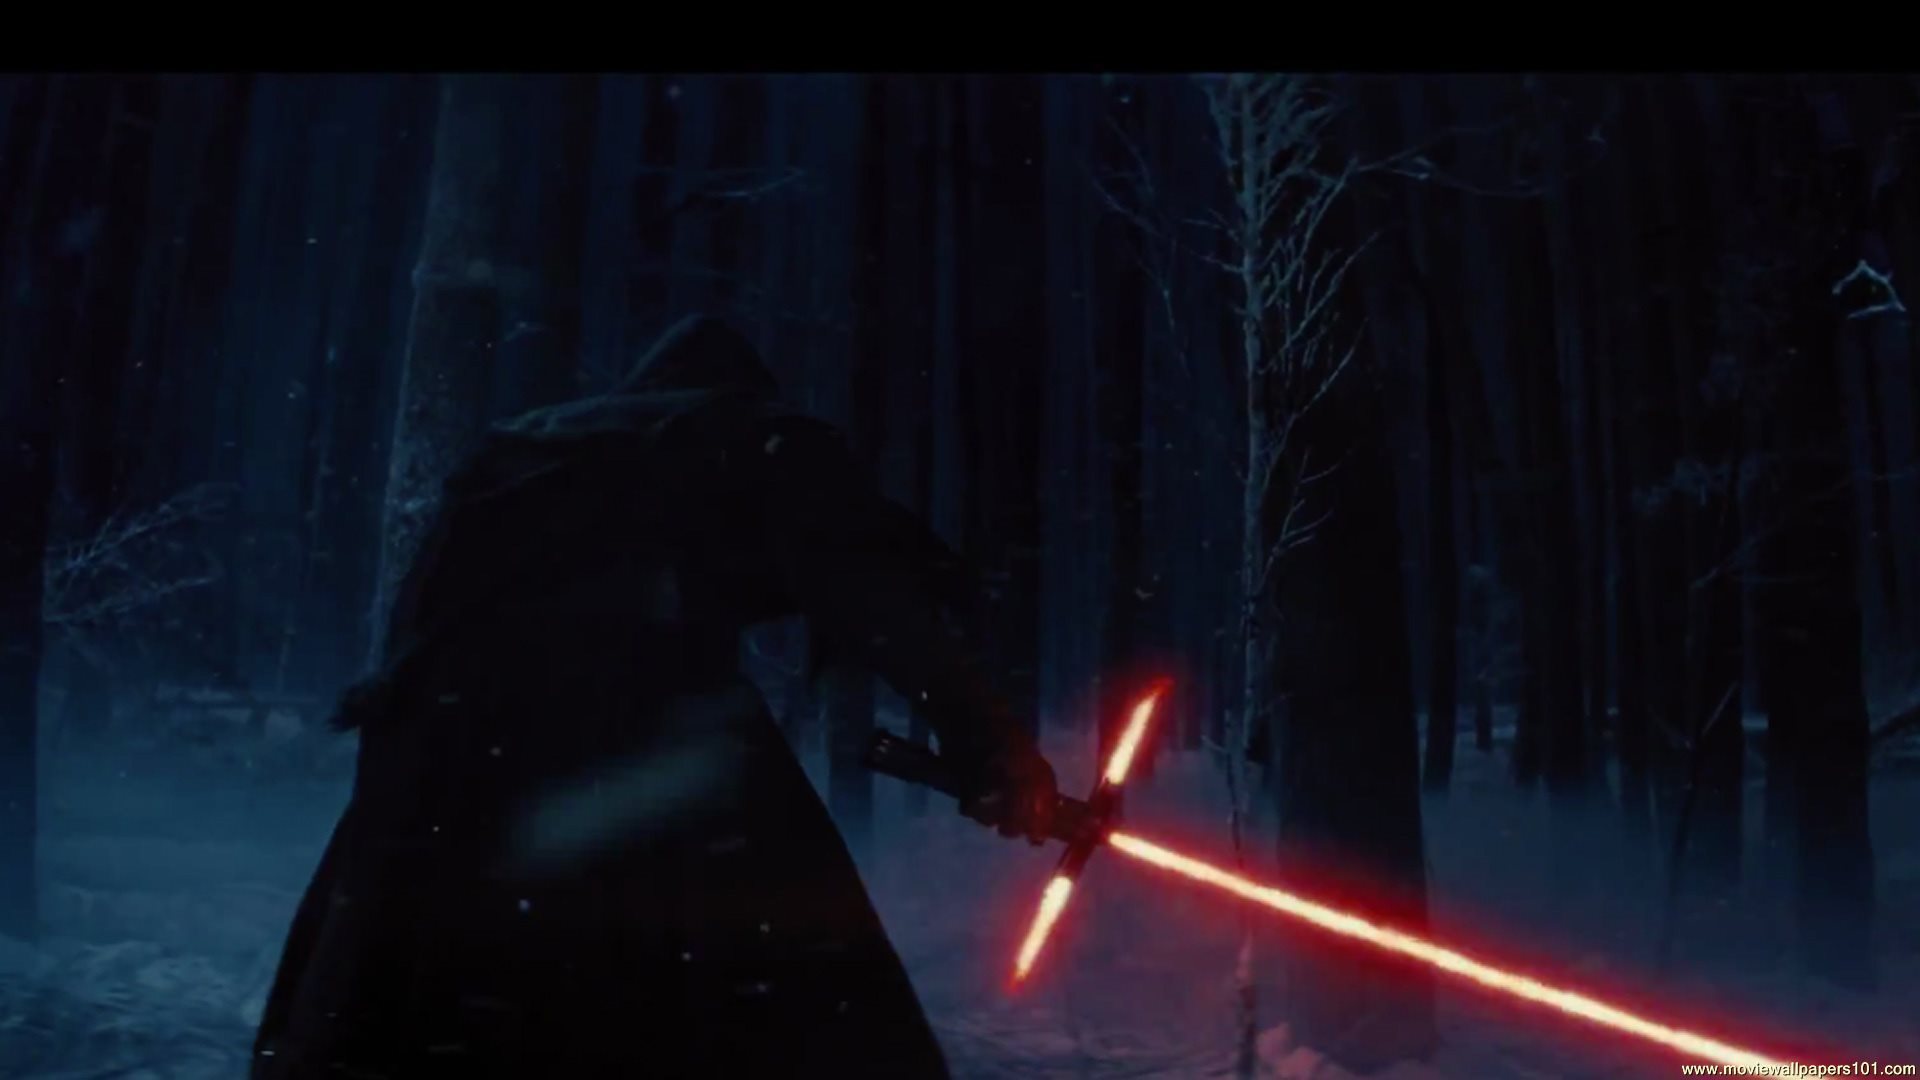 Wars Episode VII The Force Awakens Movie Wallpaper Search more high